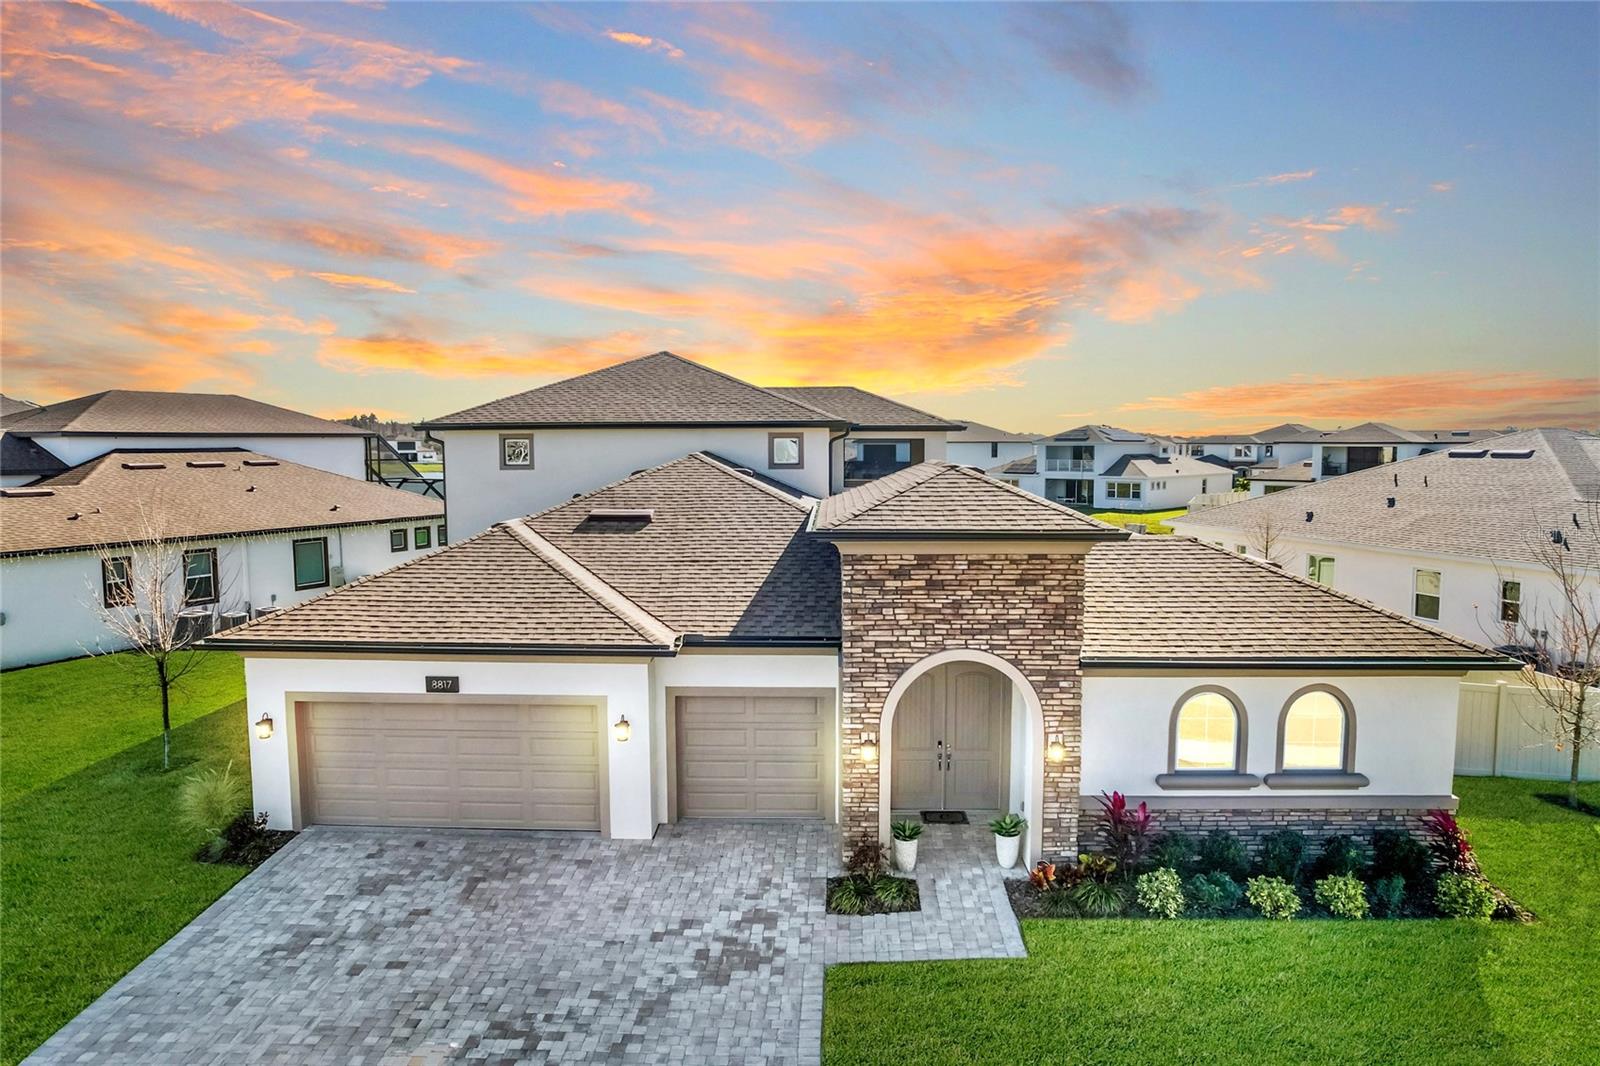 6 Beds | 6 Bath | 4,631 | Mother in law suite |.